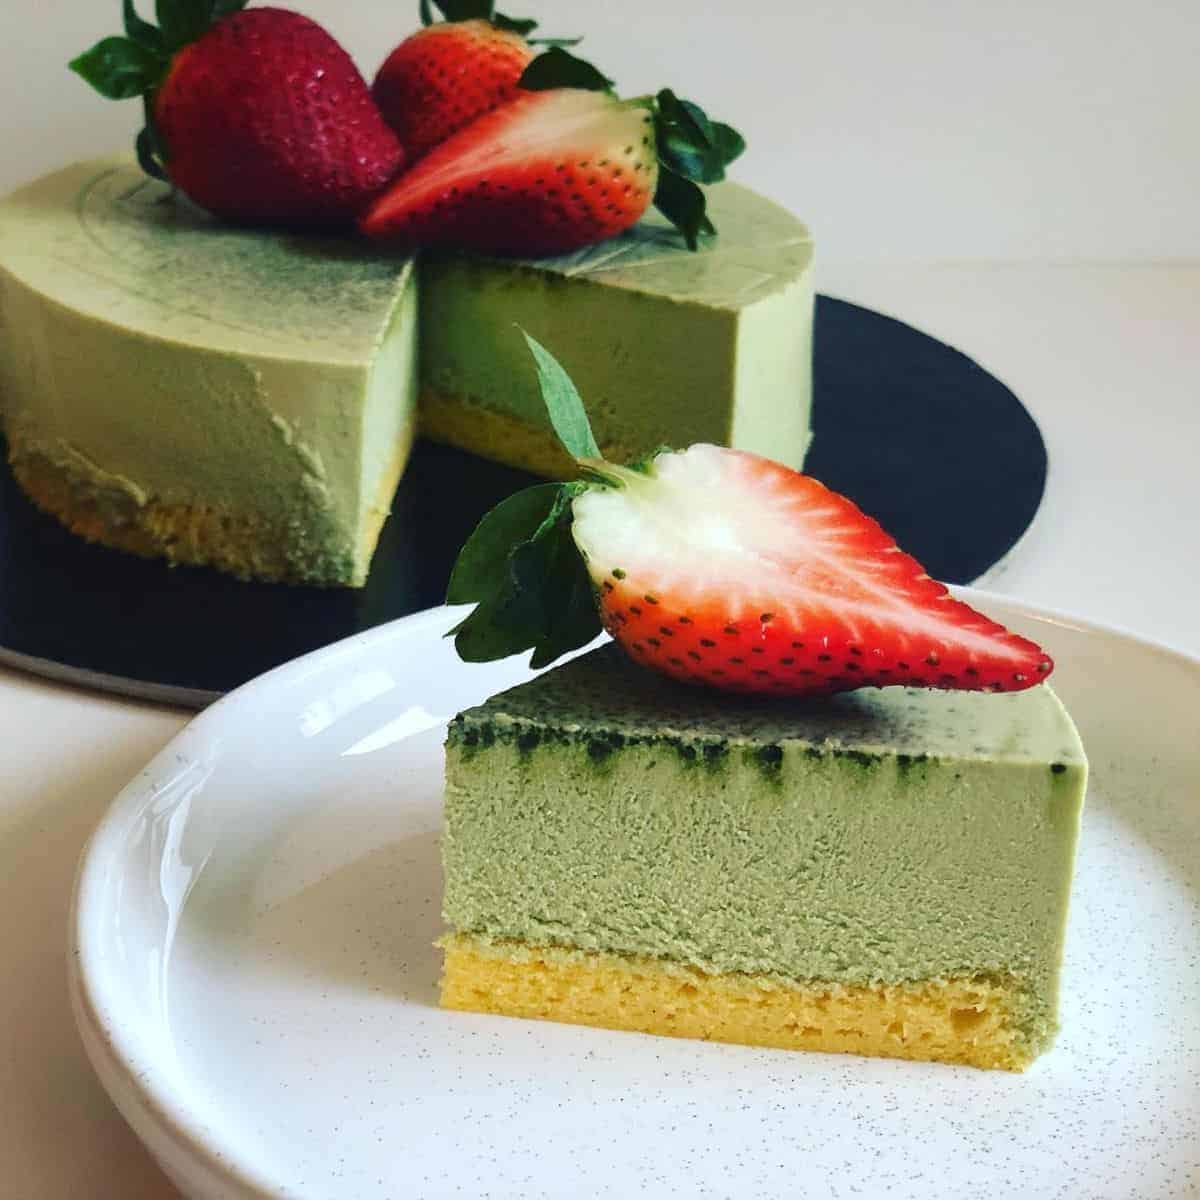 One layer of Matcha cheesecake in a black tray and one cake slice in a white plate with fresh strawberry slices